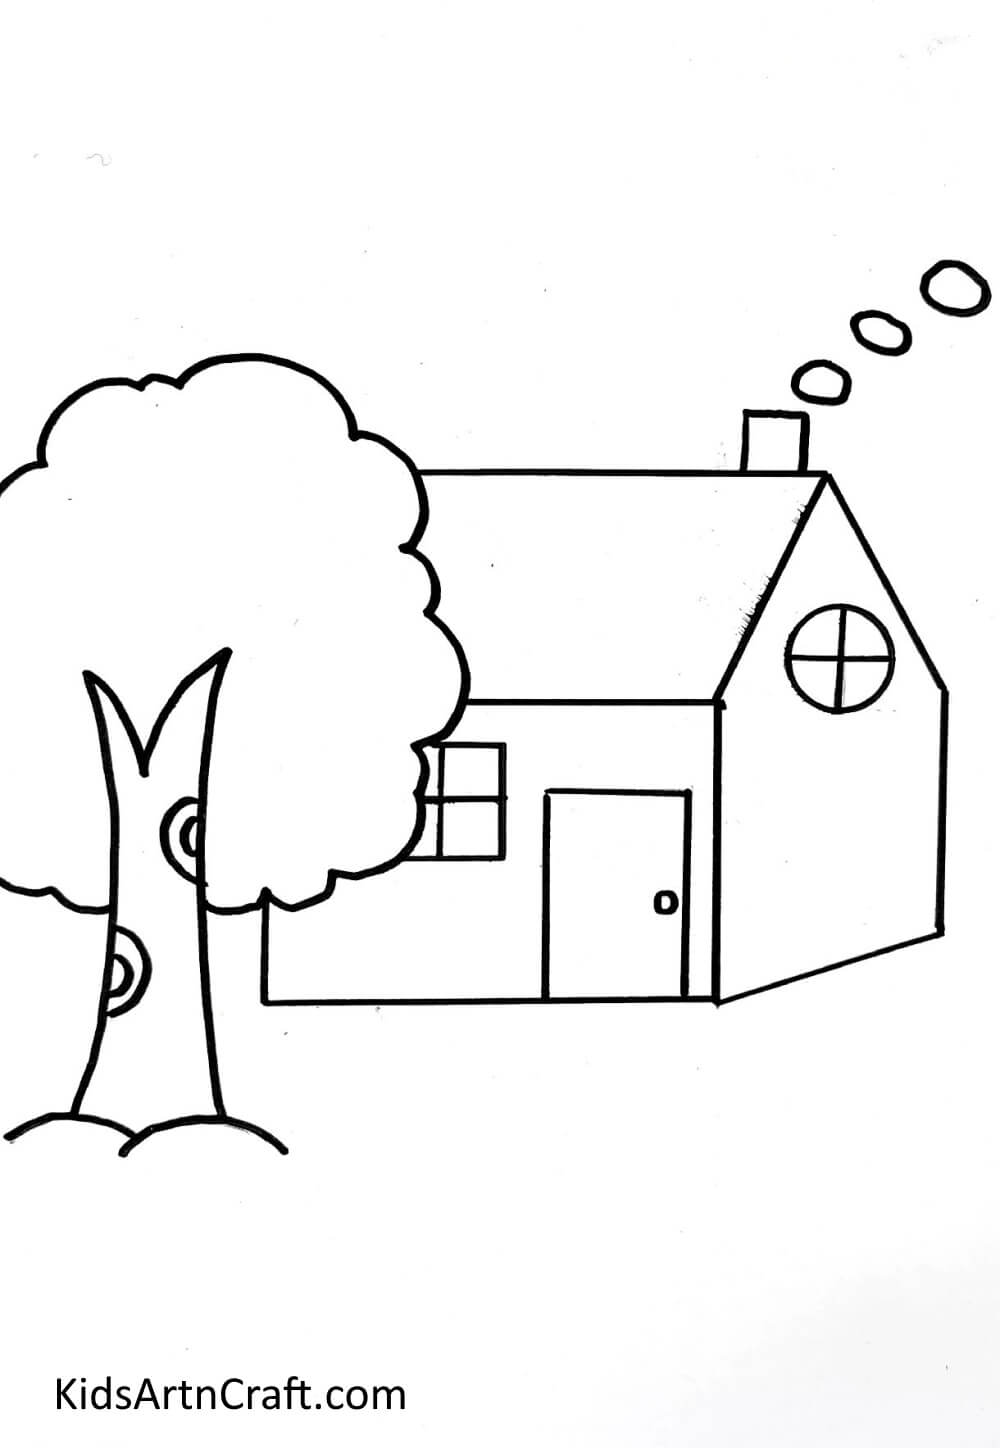 Drawing A House Behind The Tree Drawing a house, tree, and scenery step by step